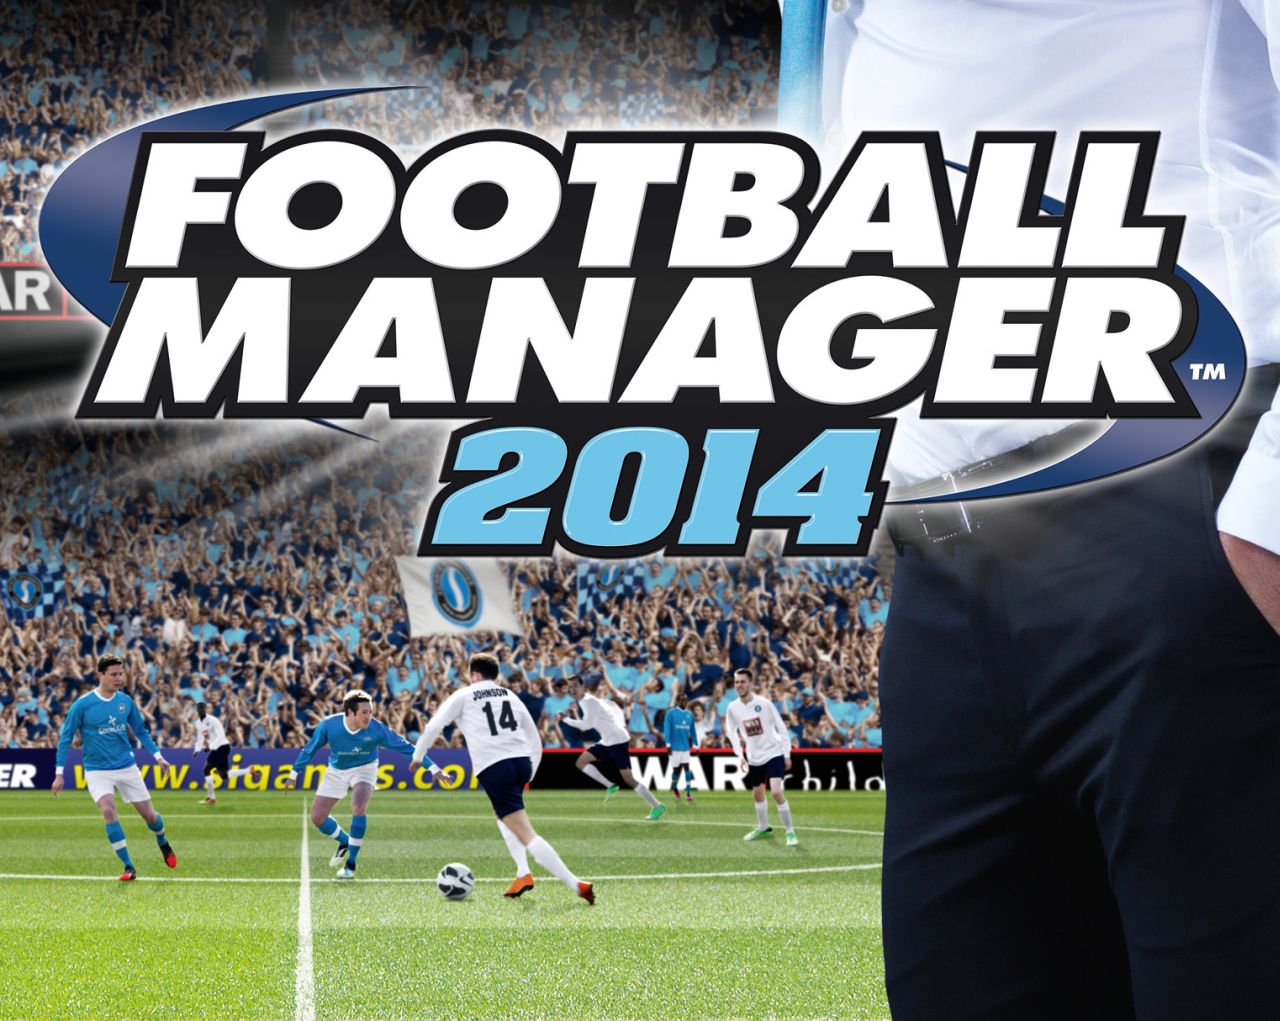 Football-Manager-2014-Gets-Full-List-of-Licensed-Clubs-and-Competitions-391249-2.jpg